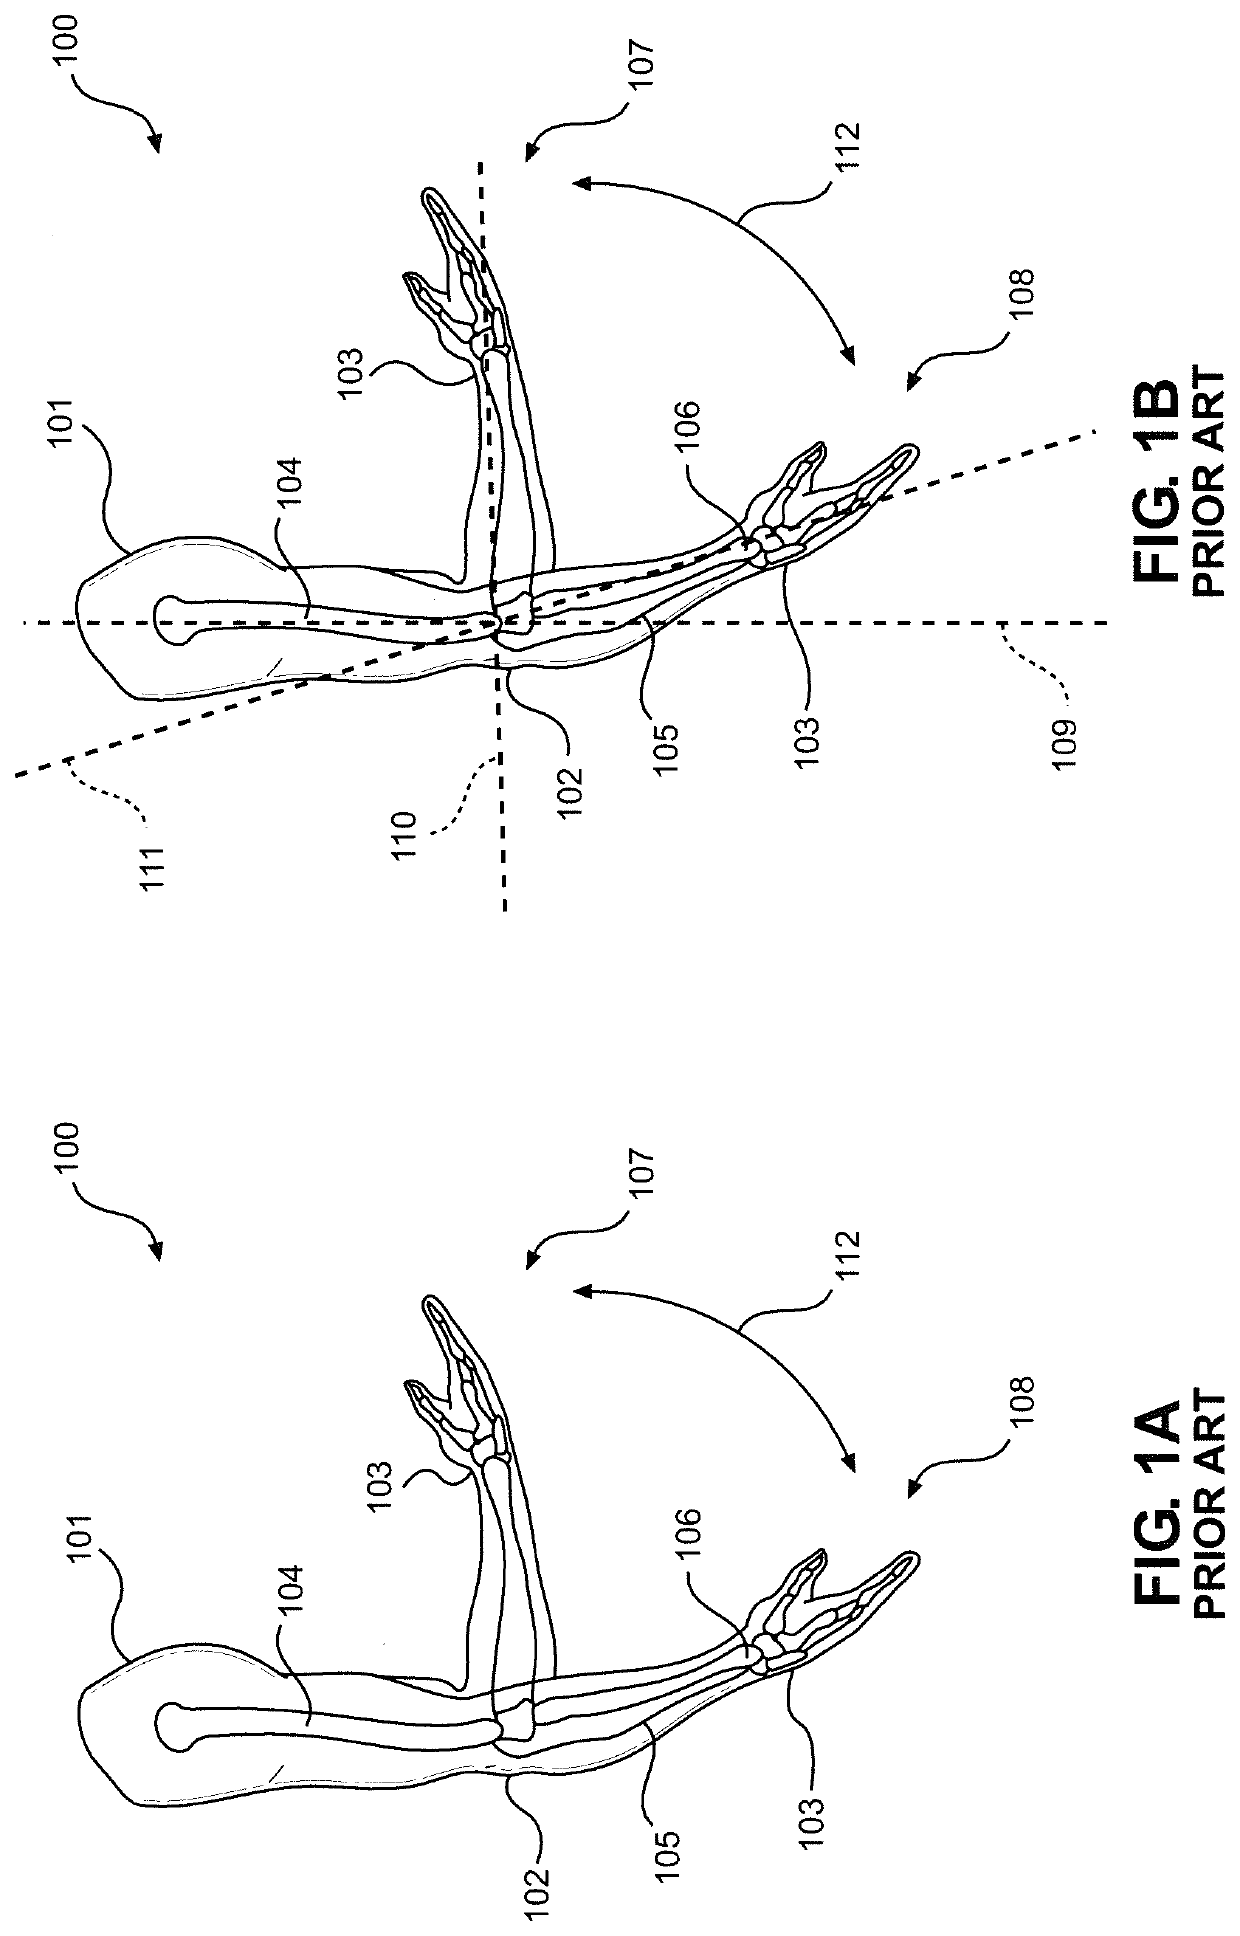 Device and Method for Strengthening the Arms of Human Exoskeletons